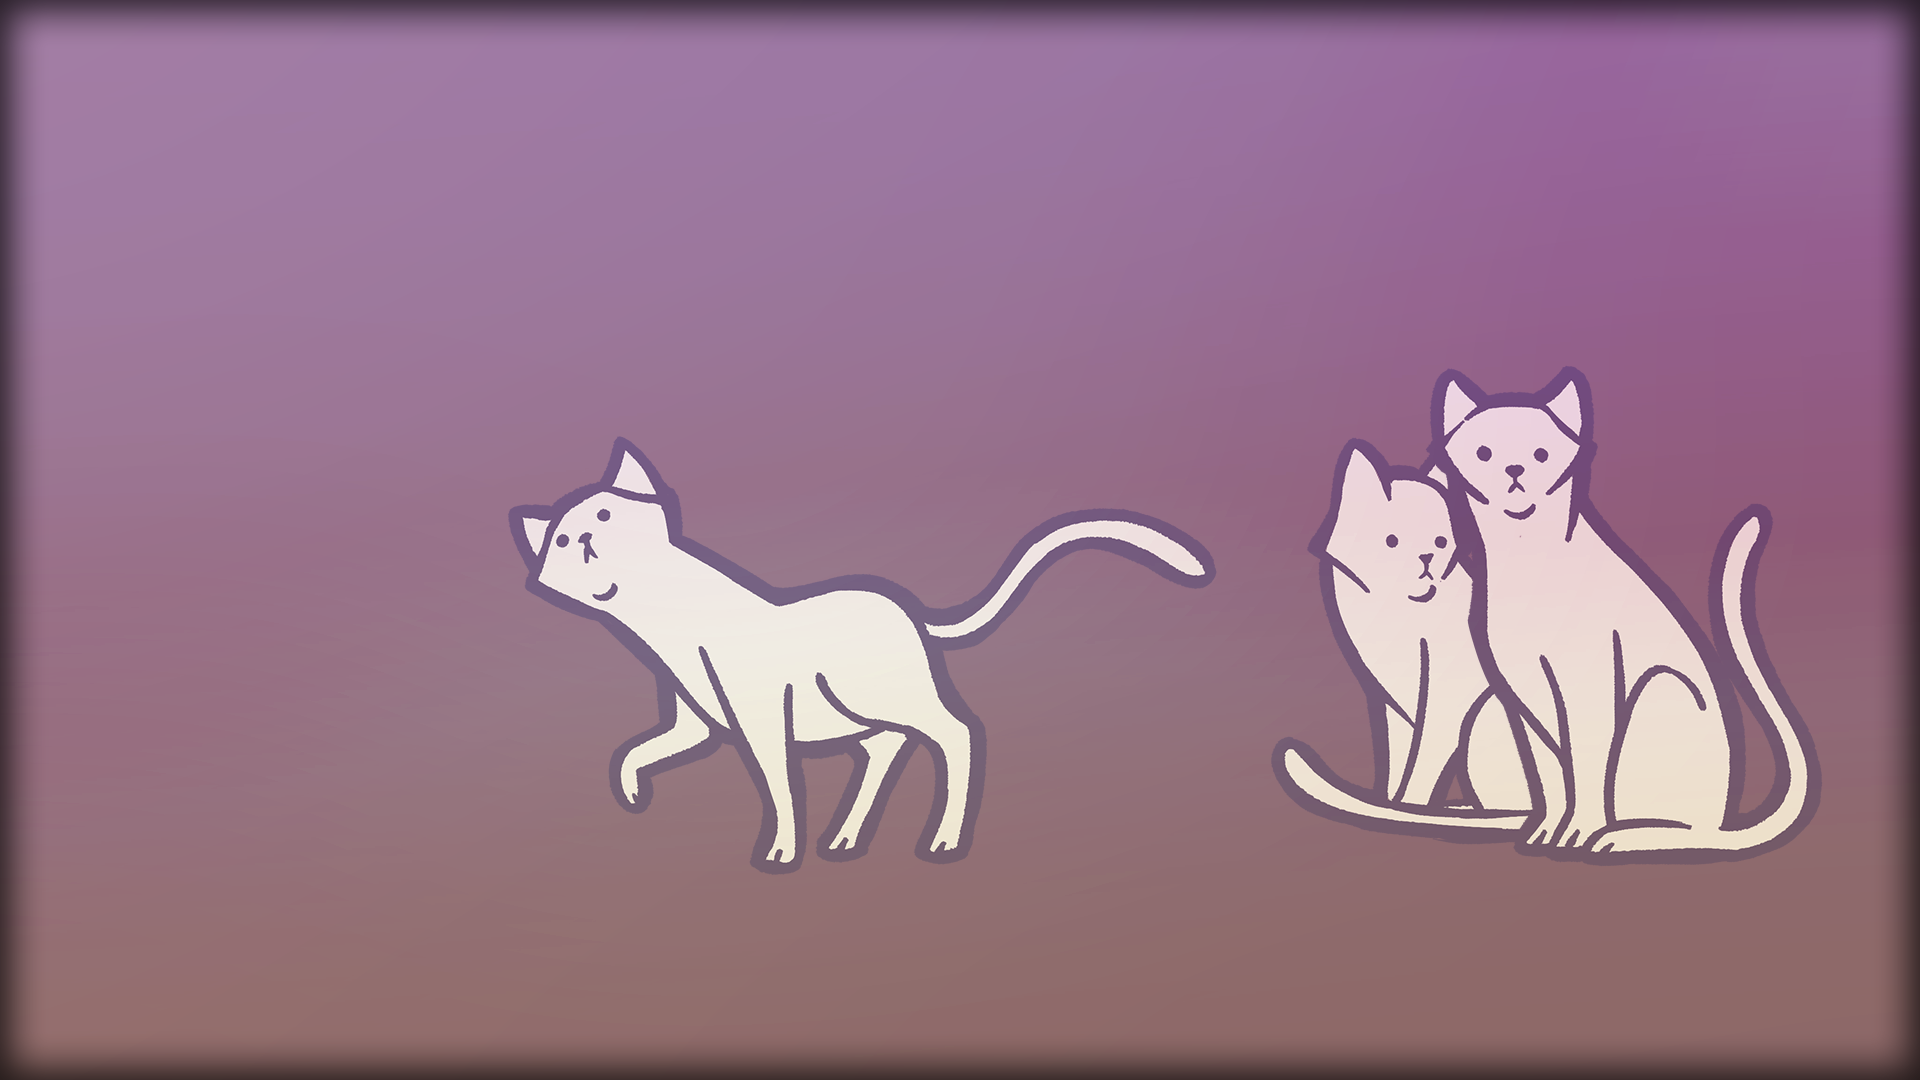 Icon for Found 340 cats